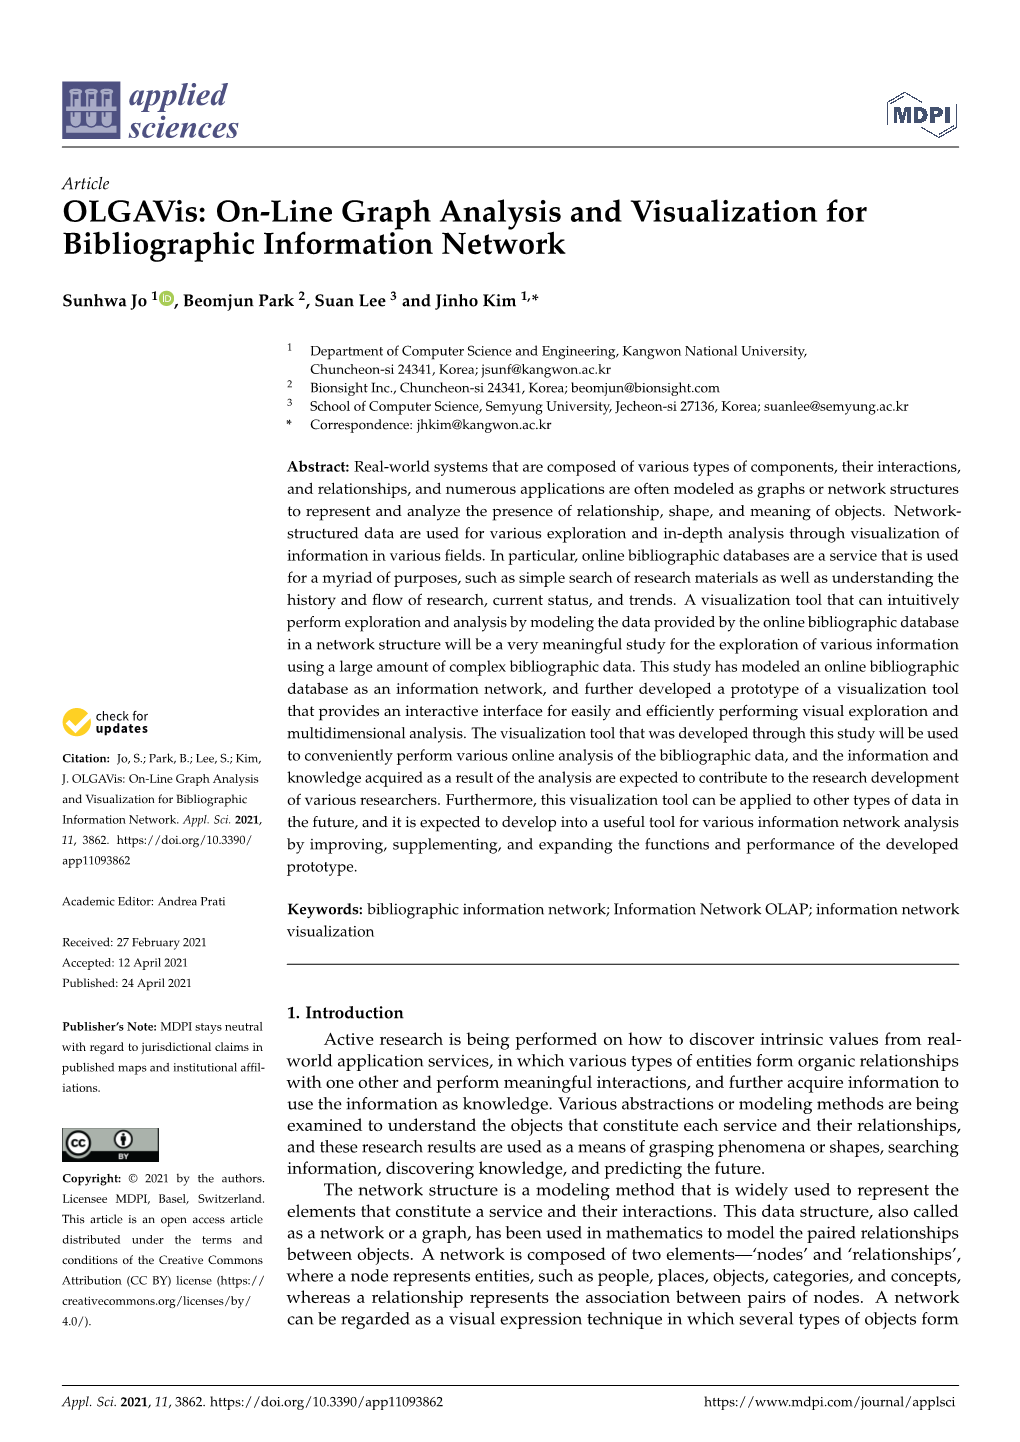 On-Line Graph Analysis and Visualization for Bibliographic Information Network